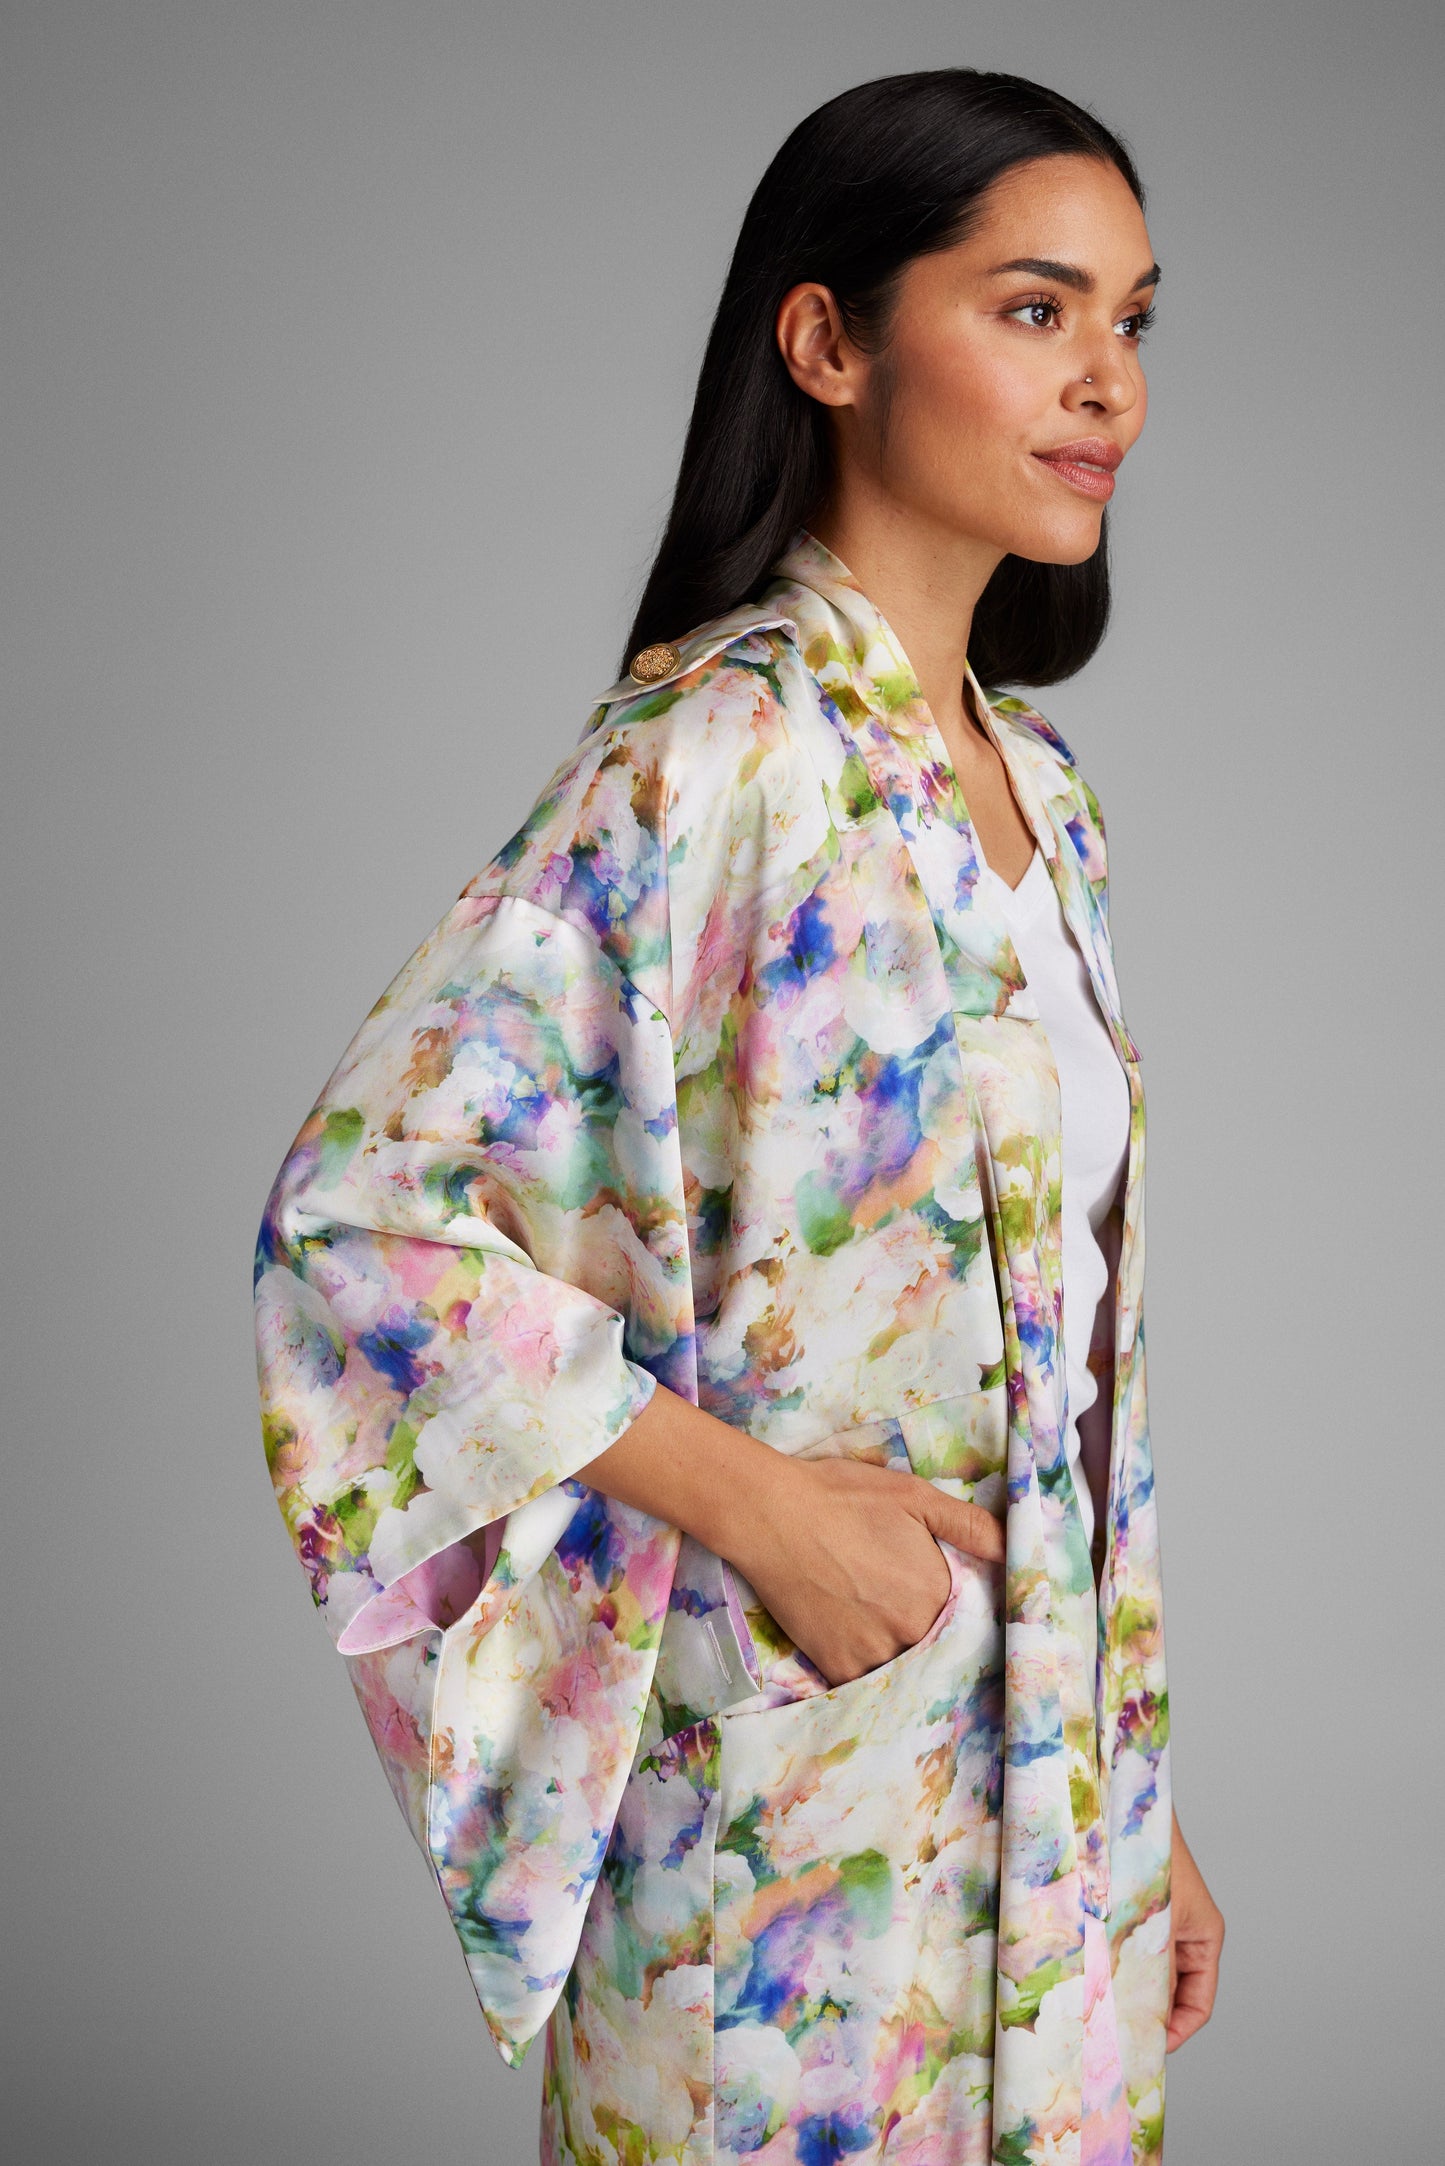 Side profile of woman with hand in her pocket wearing an all over floral printed kimono duster made from recycled materials